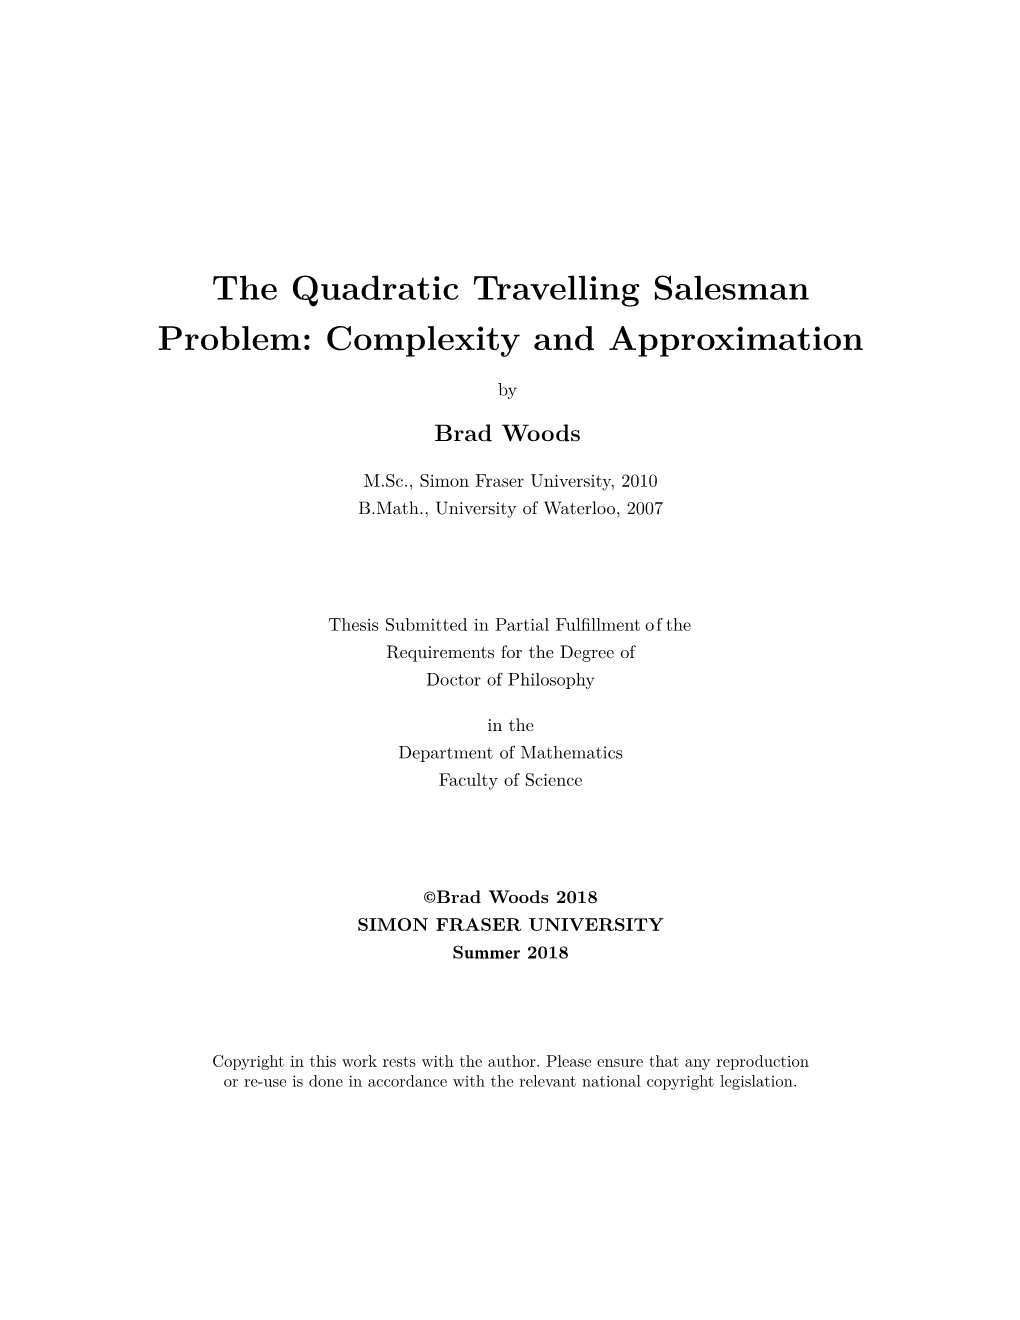 The Quadratic Travelling Salesman Problem: Complexity and Approximation